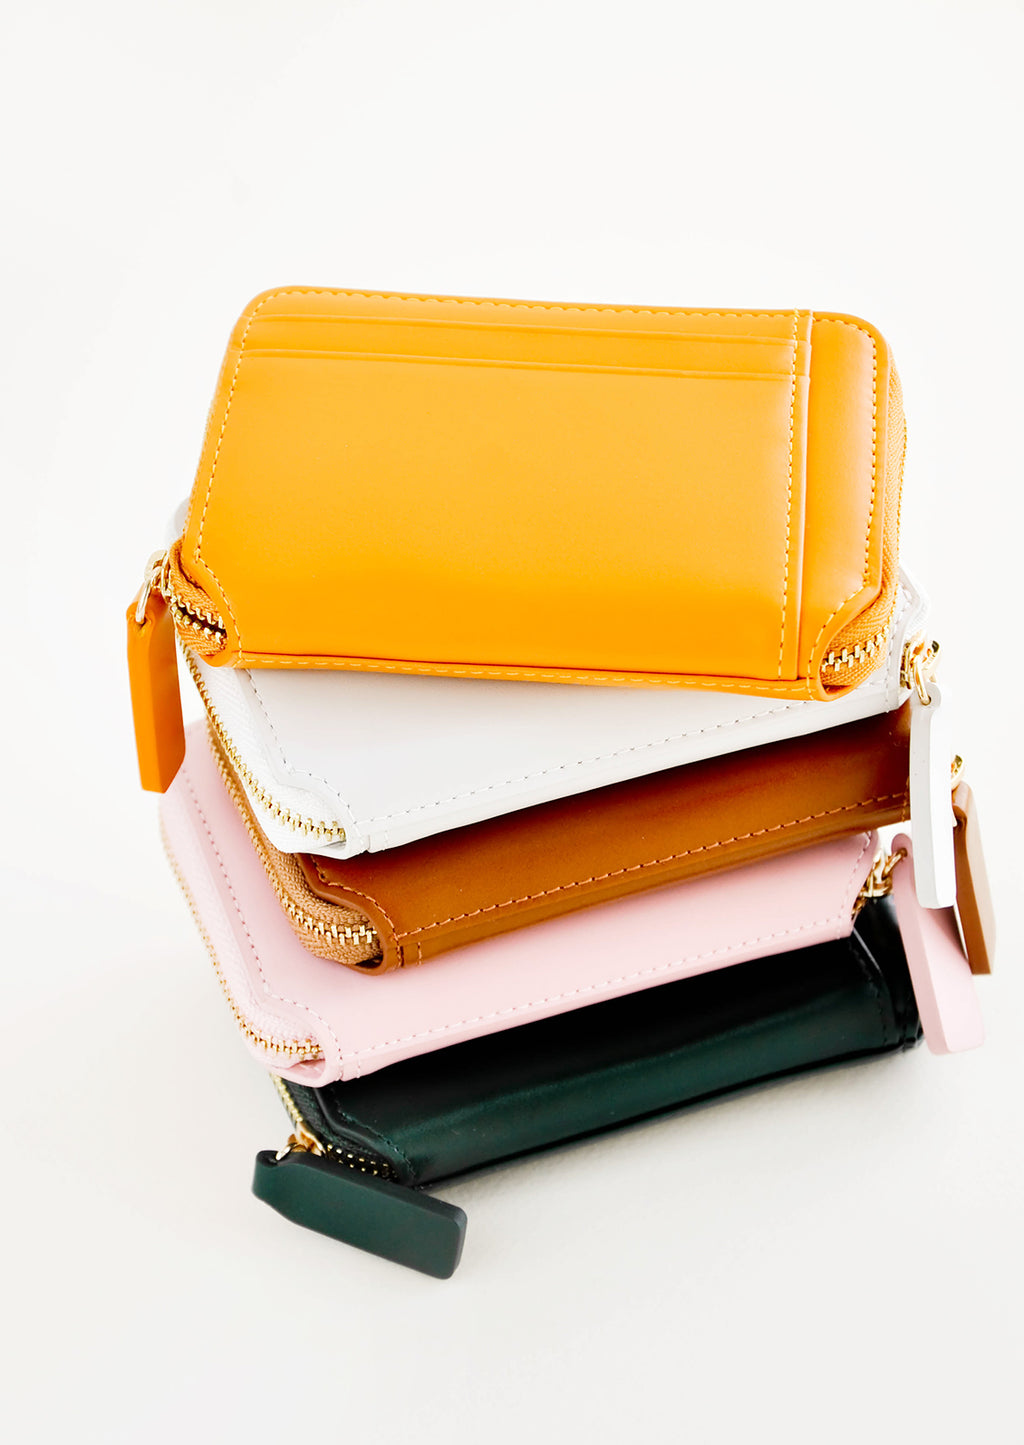 3: Stack of colorful leather zip wallets.